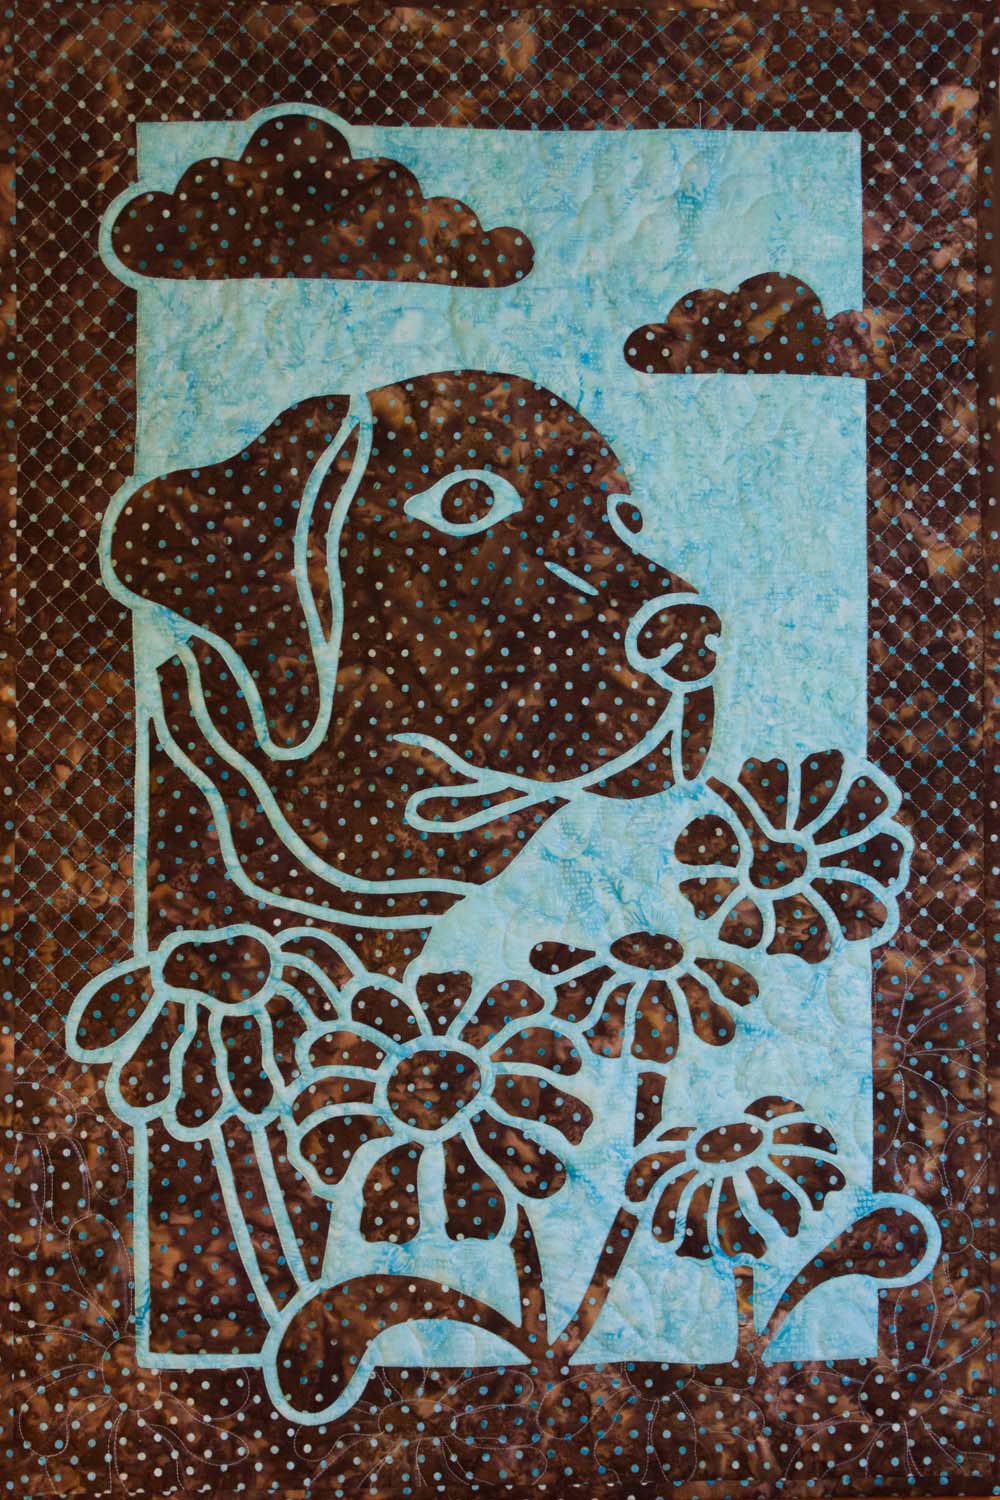 Dog and Daisy 2 Fabric Applique Quilt Pattern